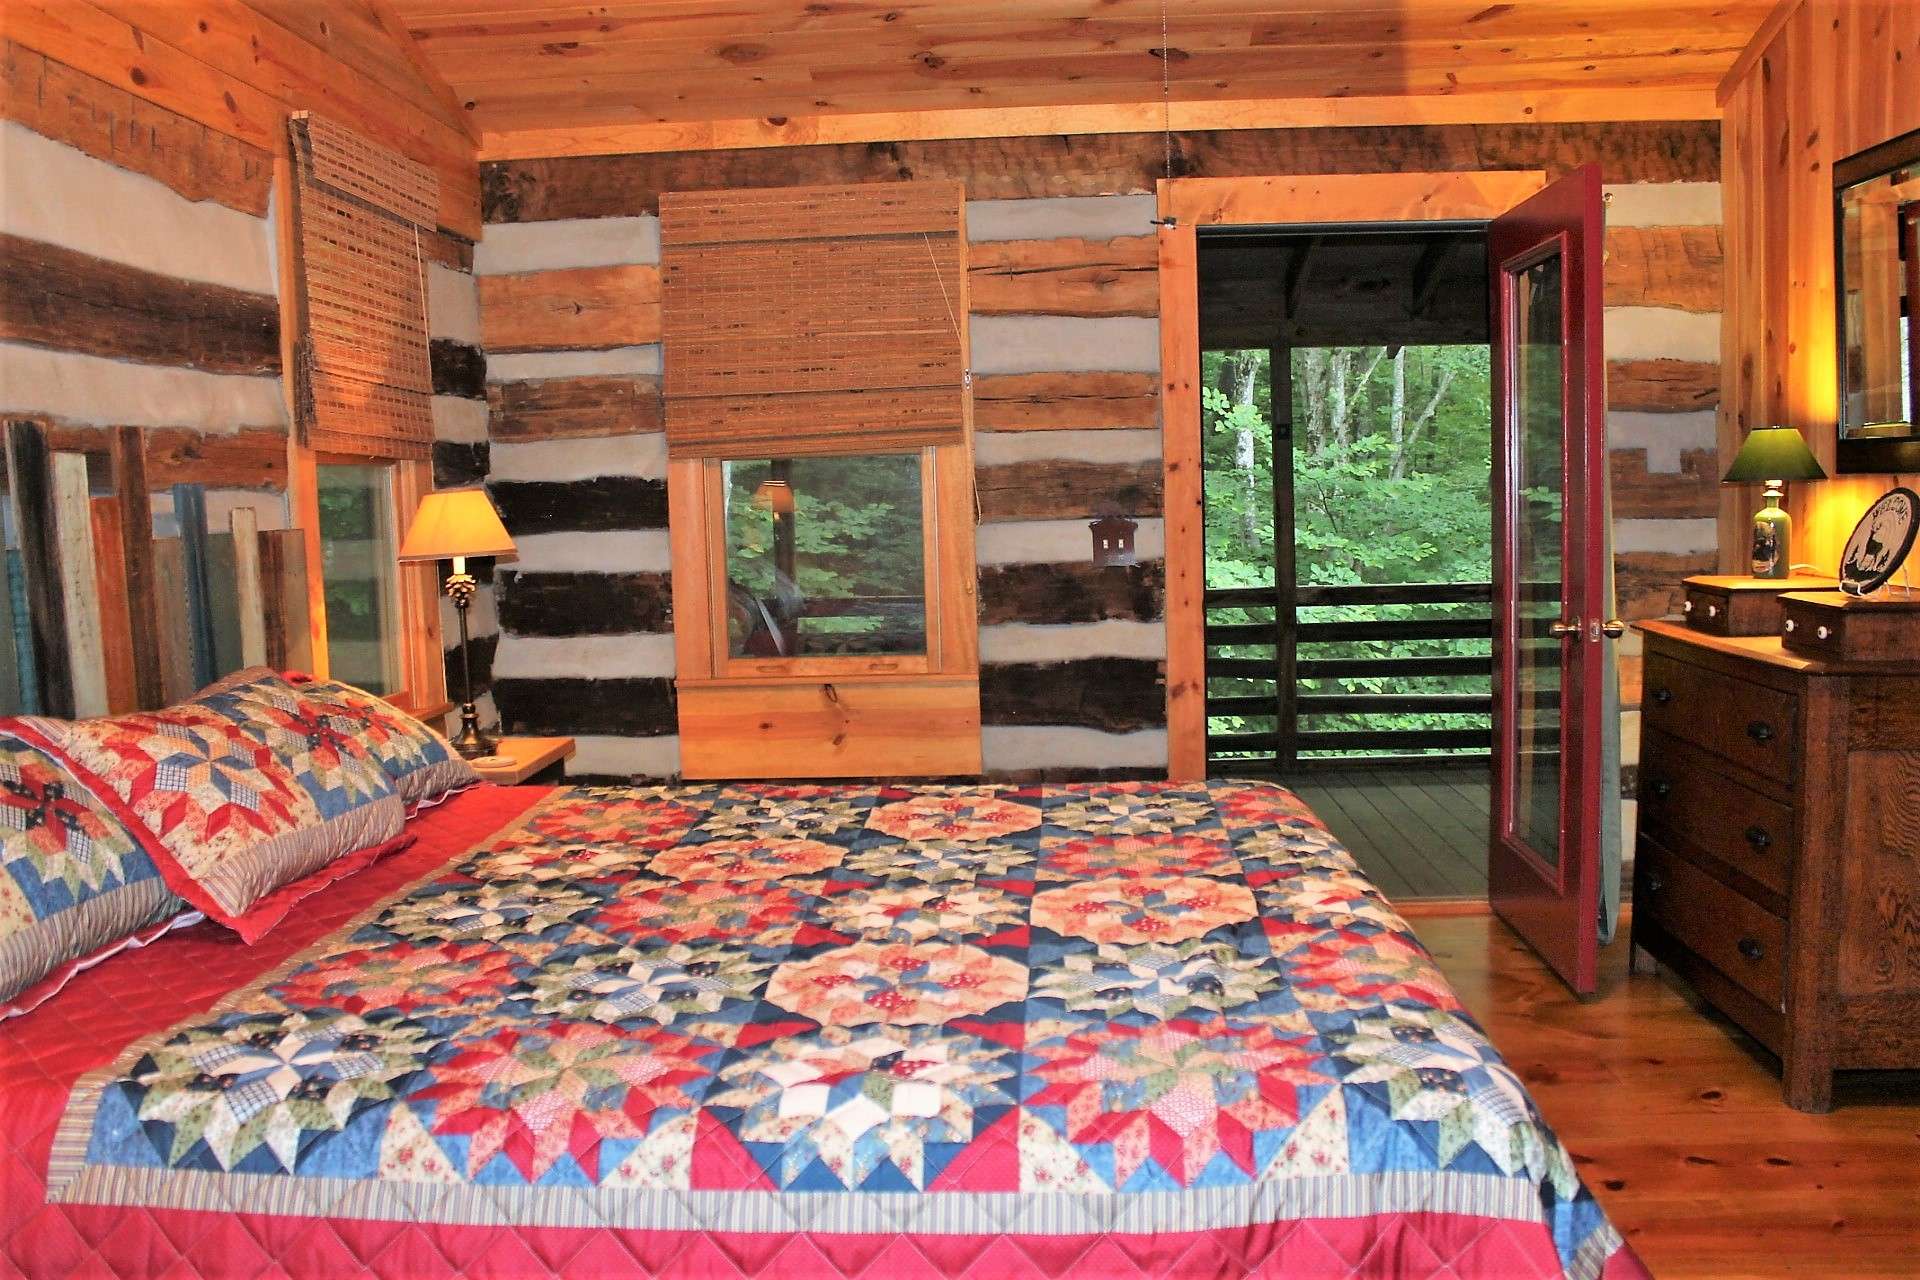 Master has access to porch so that you can sleep comfortably listening to the sounds of the creek just steps away.